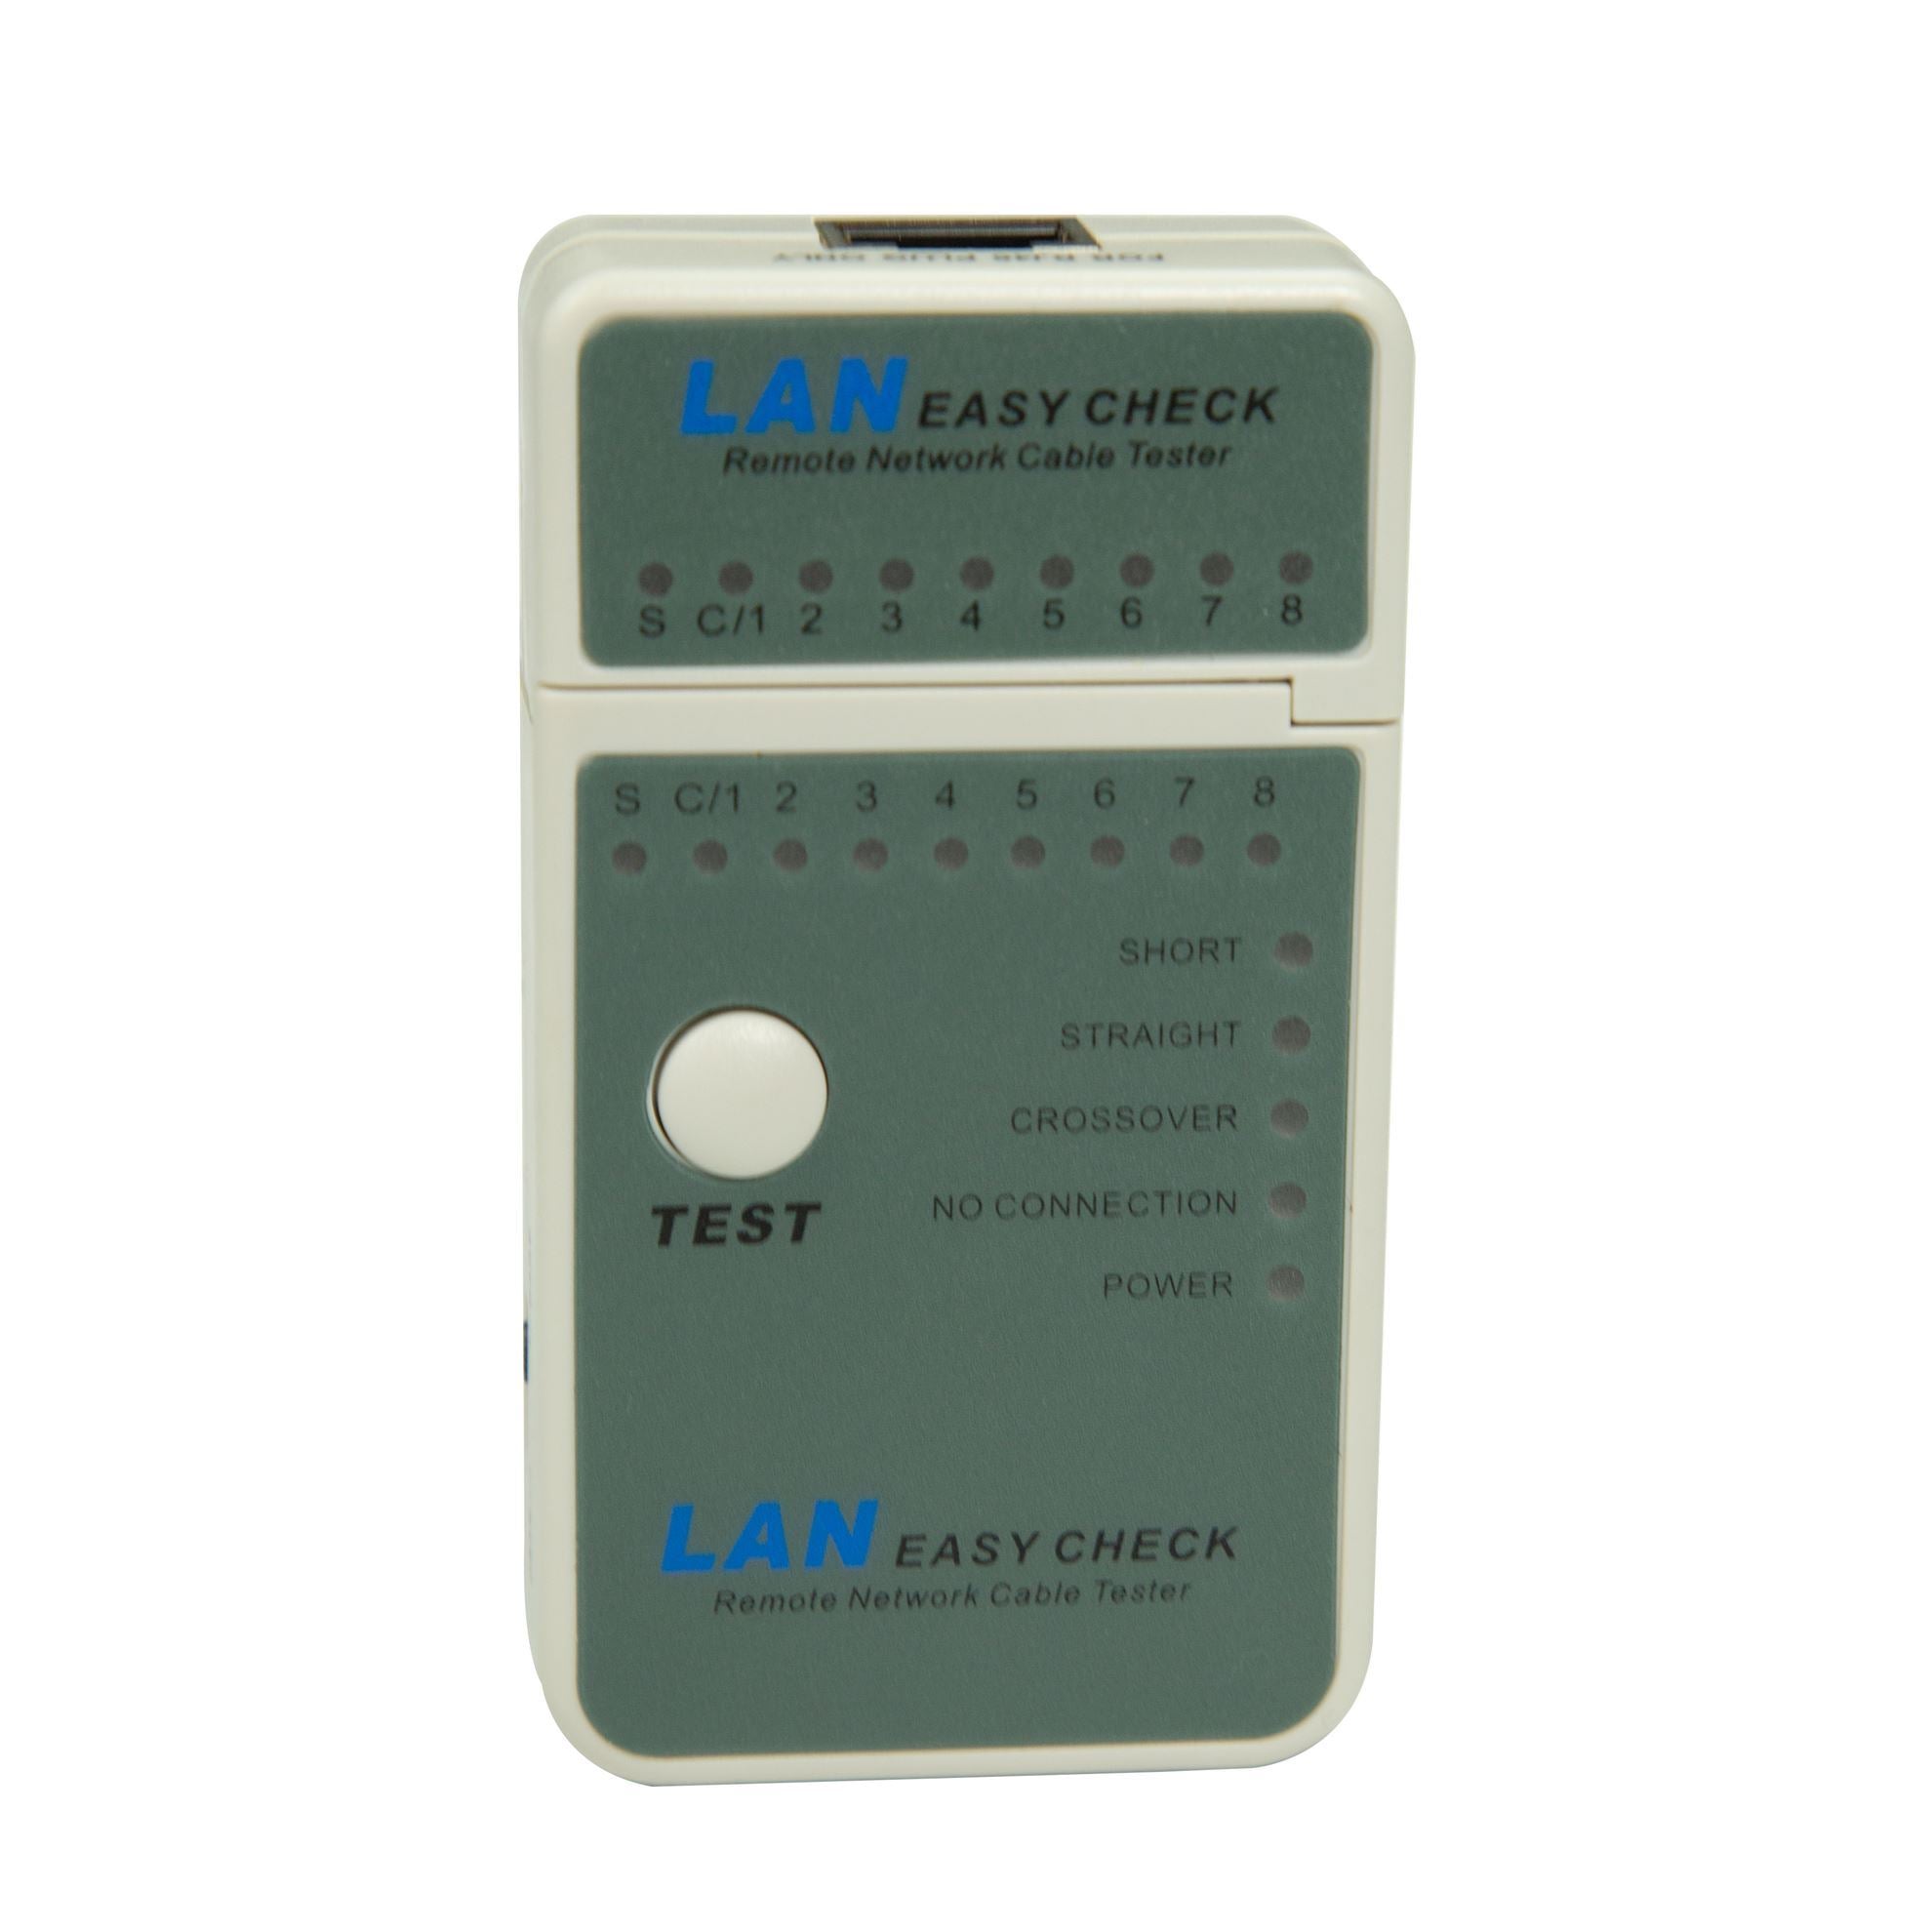 DYNAMIX Mini LAN Data Cable Tester with LED & Beep Sound Indicators. - 0